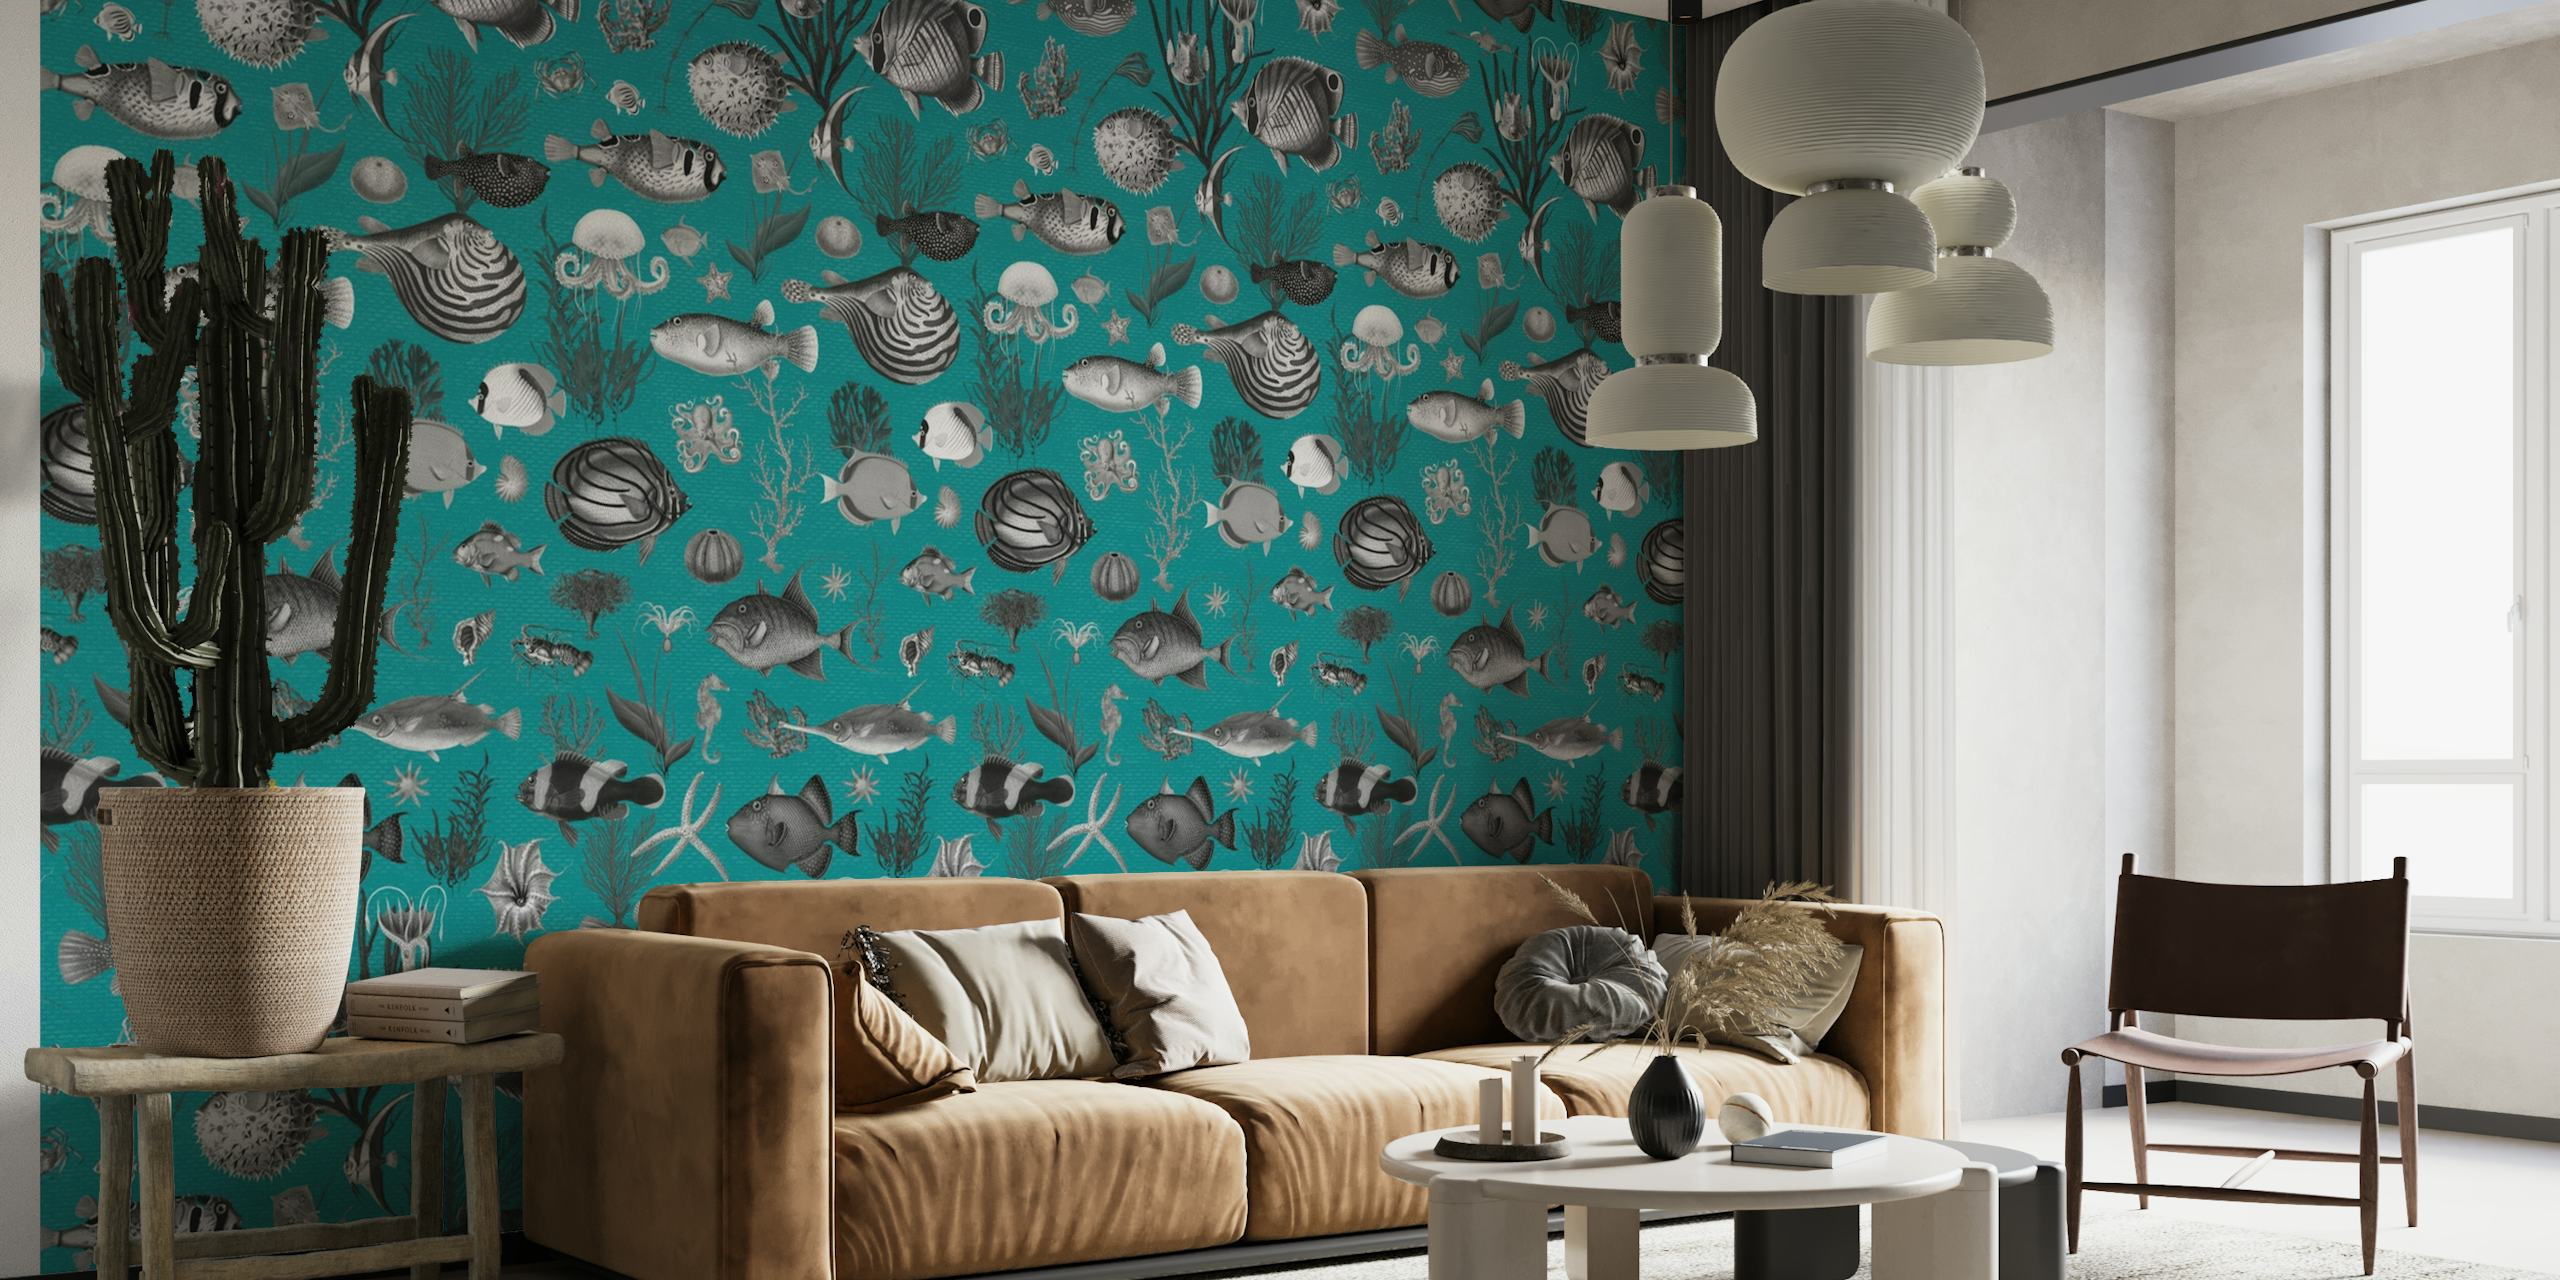 Underwater pattern wall mural with grey, teal, and blue tones